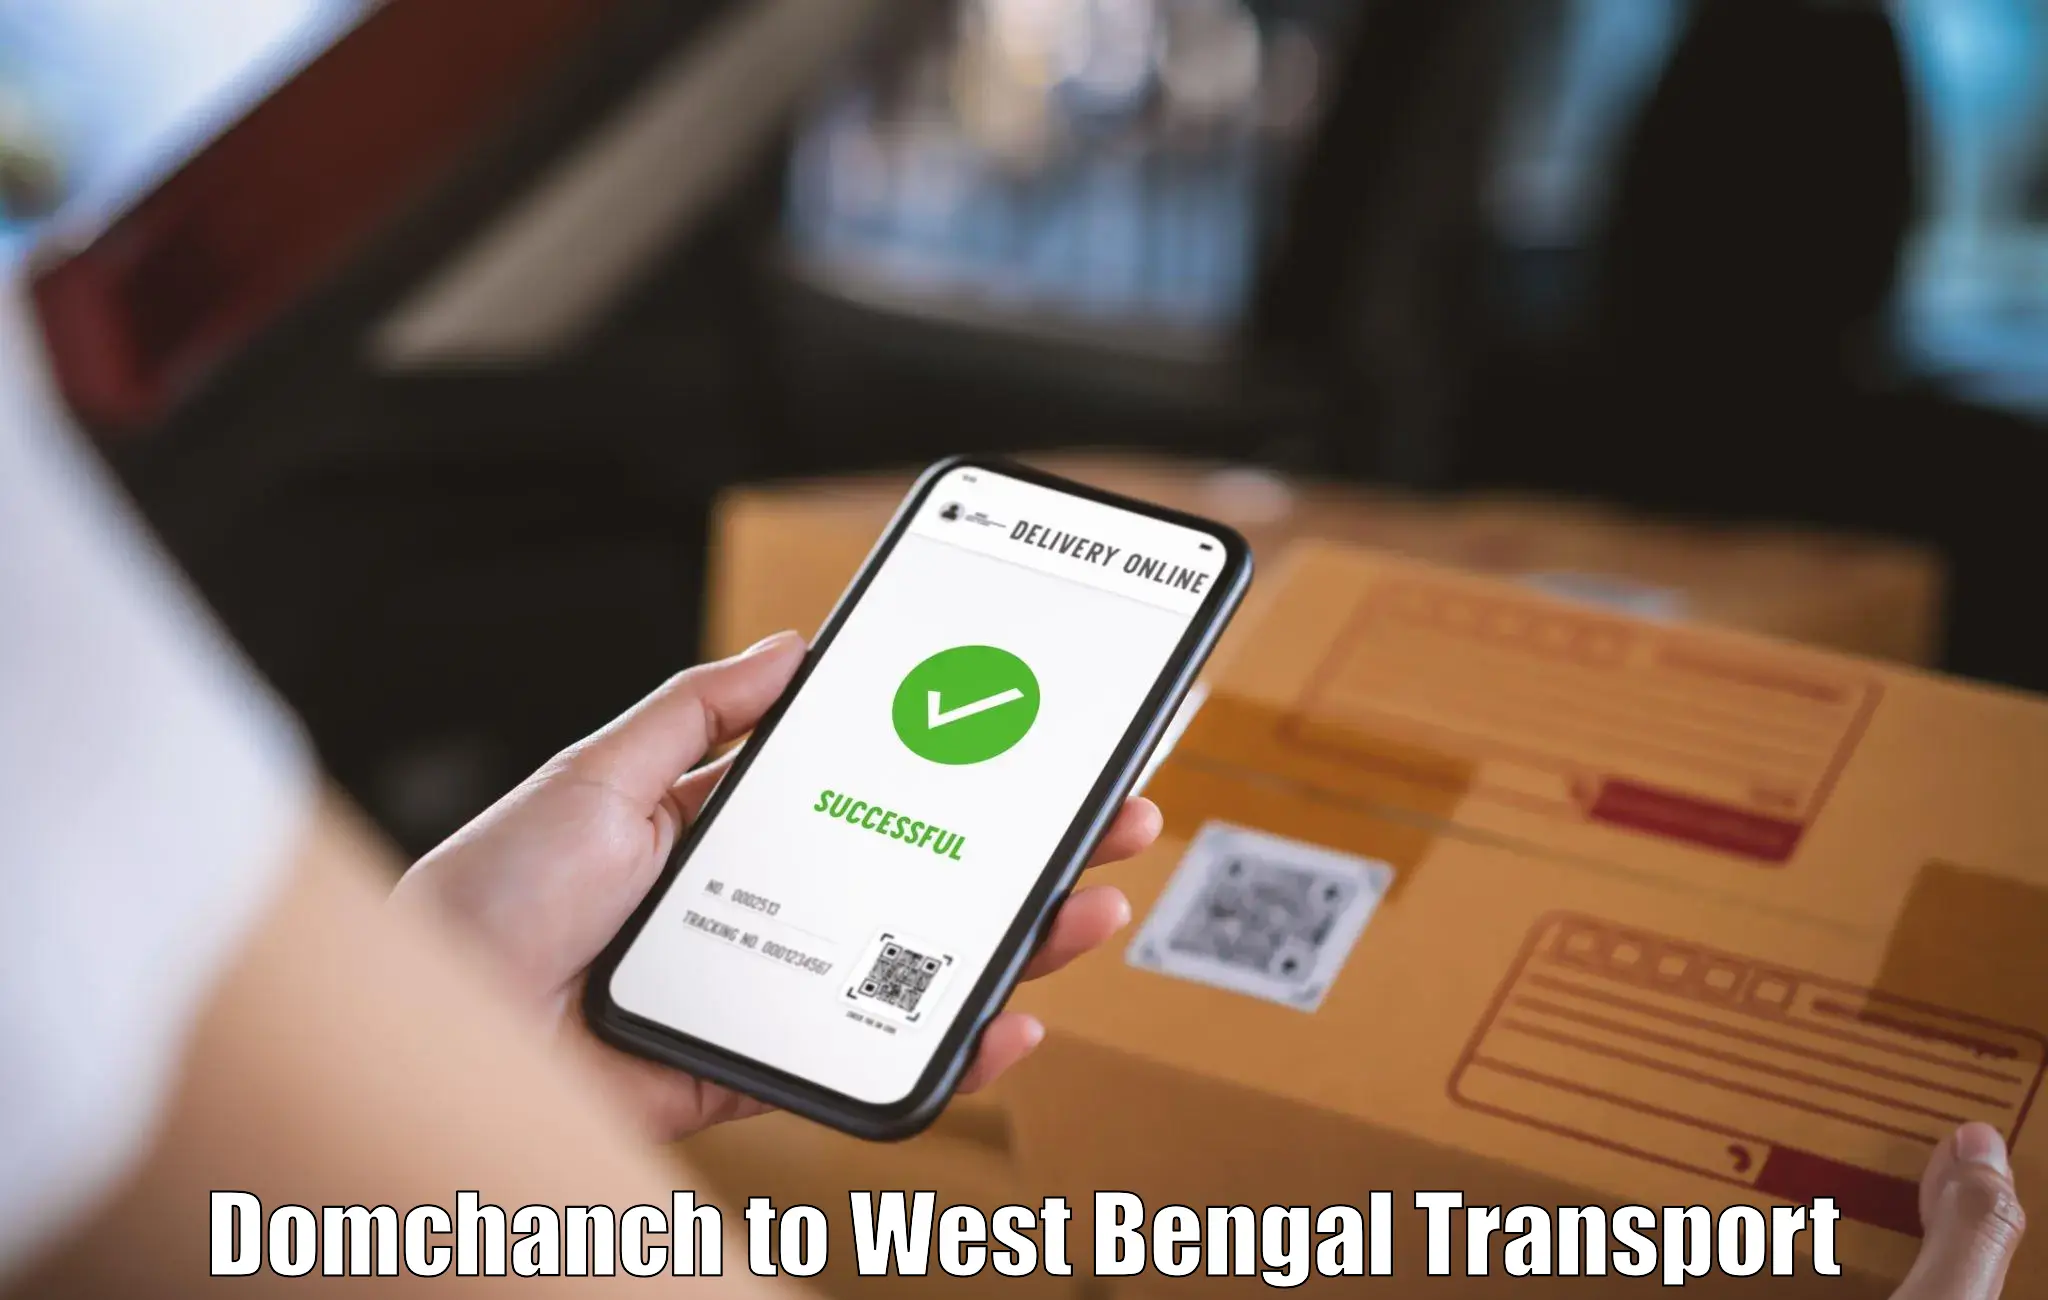 Nearby transport service Domchanch to Berhampore